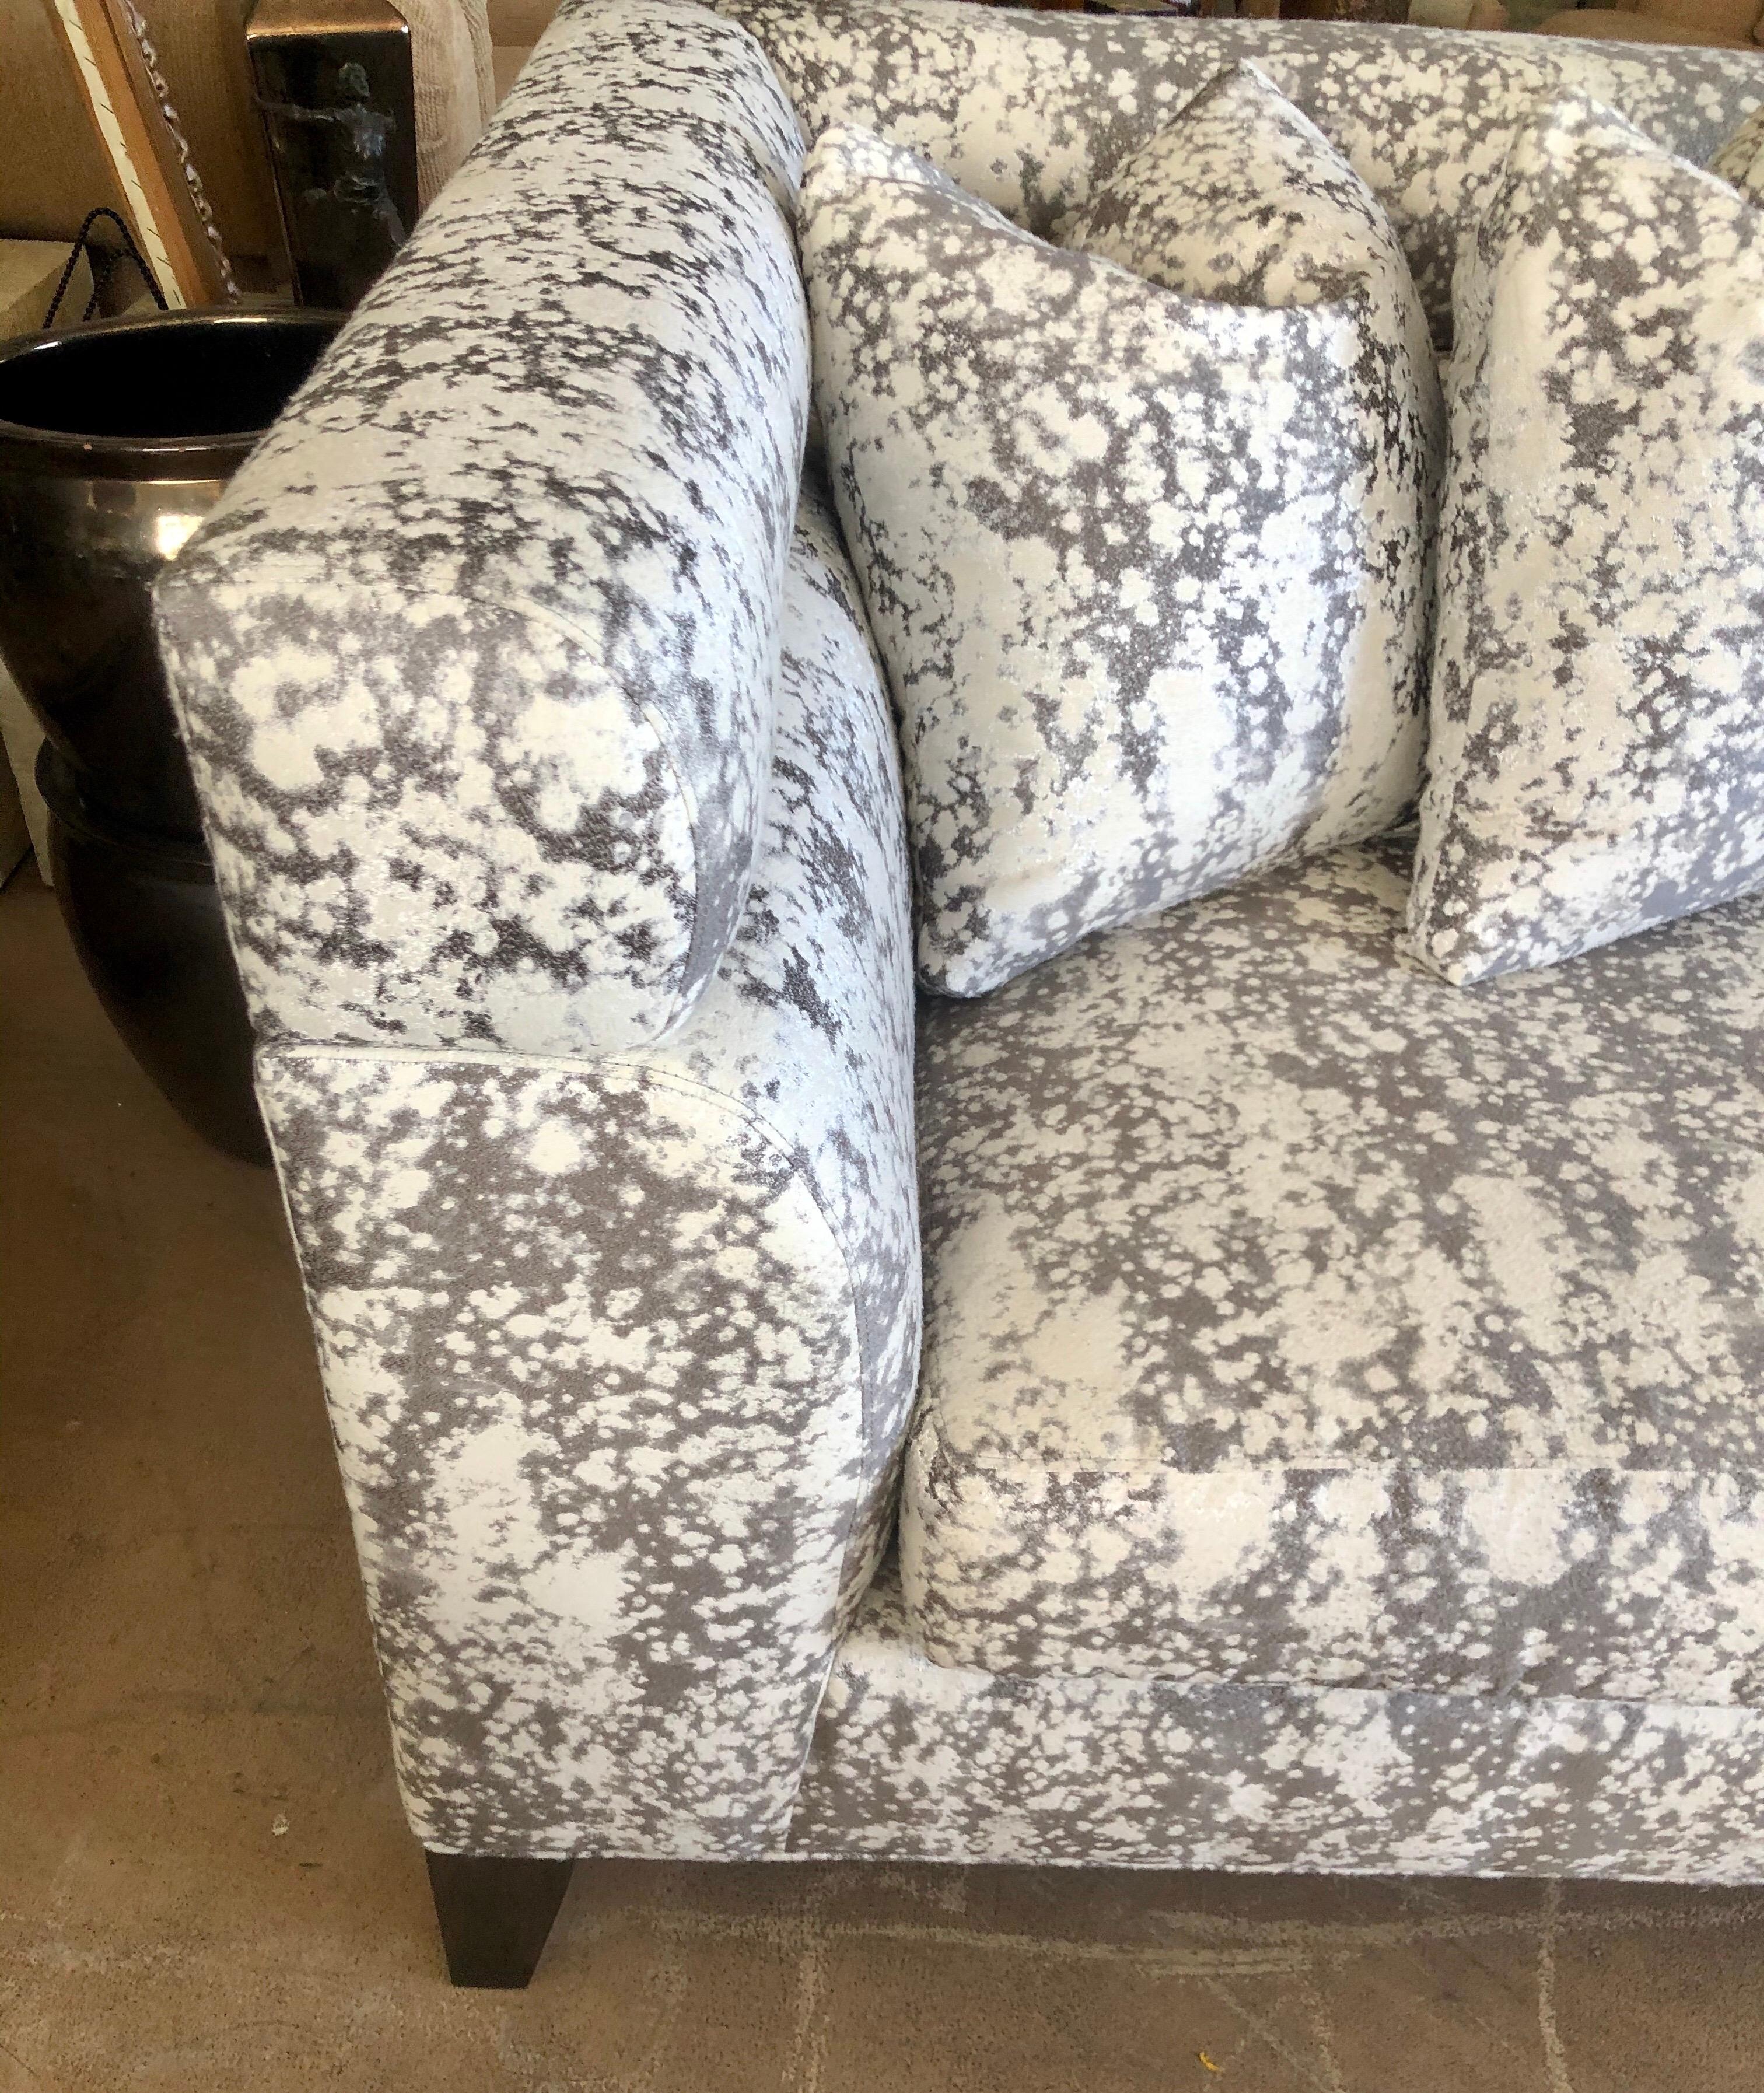 This beautiful contemporary sofa is less than six months old. It was custom ordered and made in the USA by high-end maker Theodore Alexander. The fabric is a modern Art abstract pattern that looks like it has metallic in it. A cross between a velour